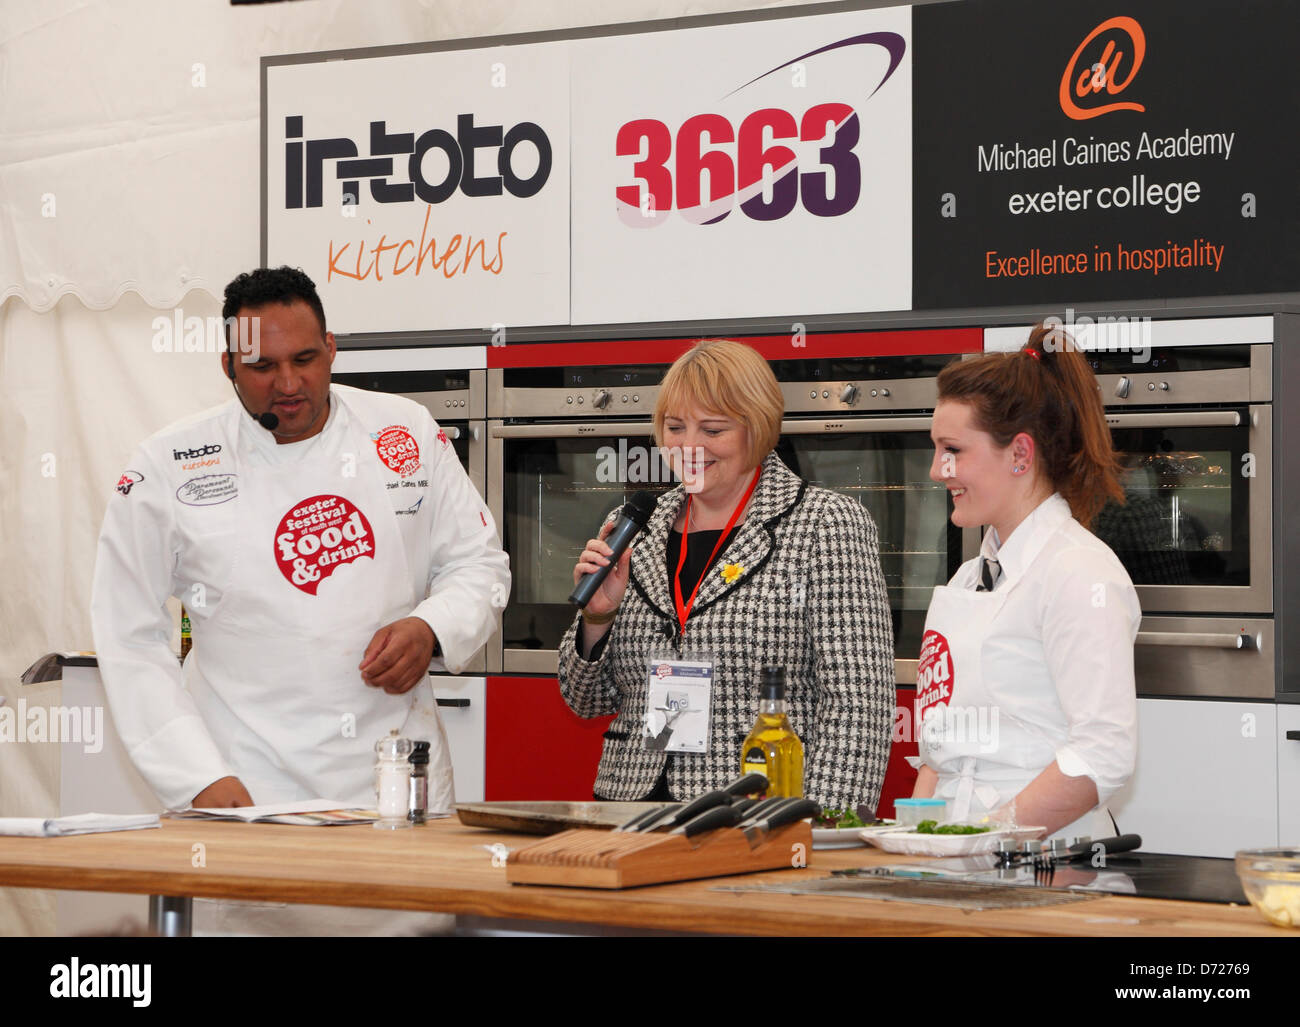 Exeter, UK. 26 April 2013. Celebrity chef Michael Caines at The Exeter Festival of Southwest Food and Drink compering the Great Student Cookoff  For Students of the Michael Caines Academy at Exeter College UK. Credit: Anthony Collins/Alamy Live News Stock Photo